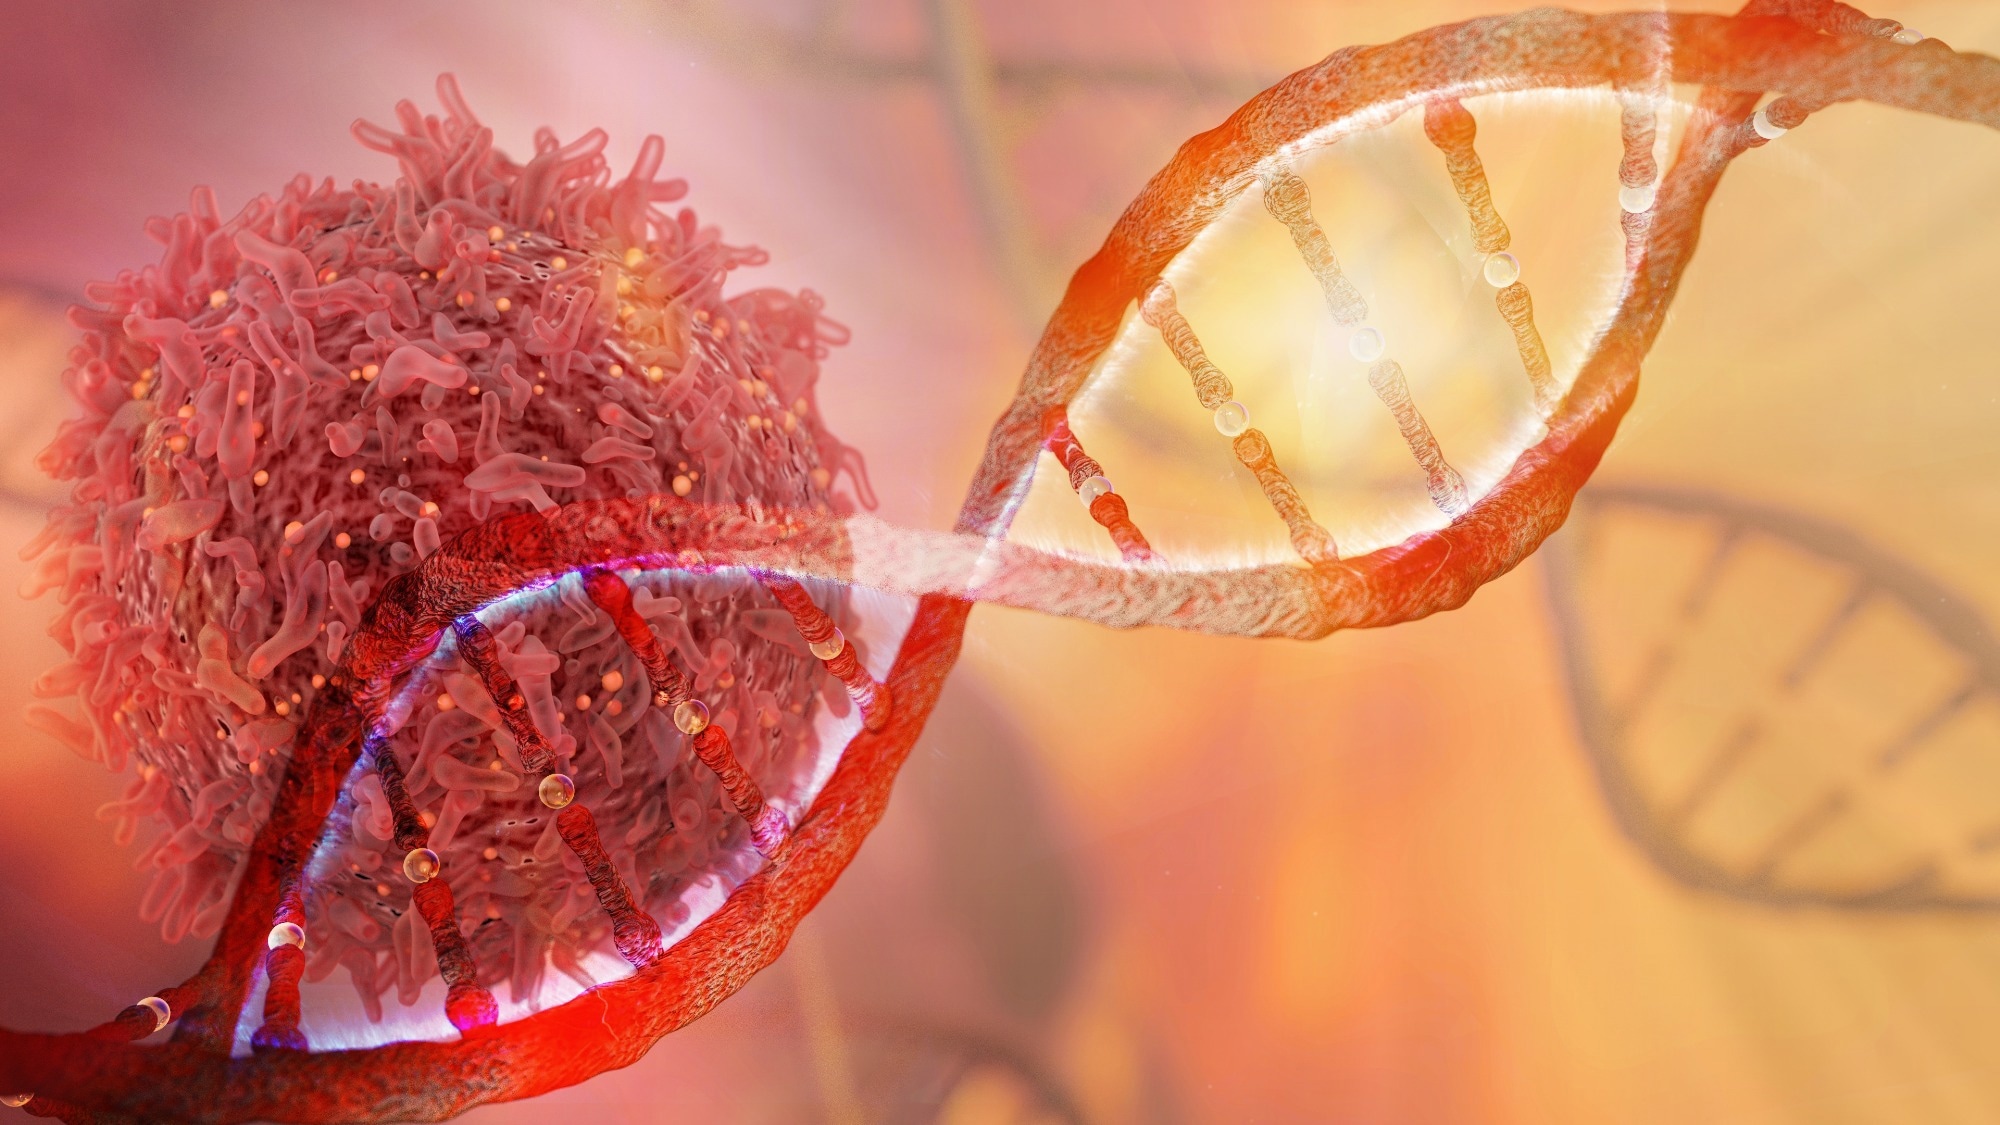 Study: Evaluation of cell-free DNA approaches for multi-cancer early detection. Image Credit: CI Photos/Shutterstock